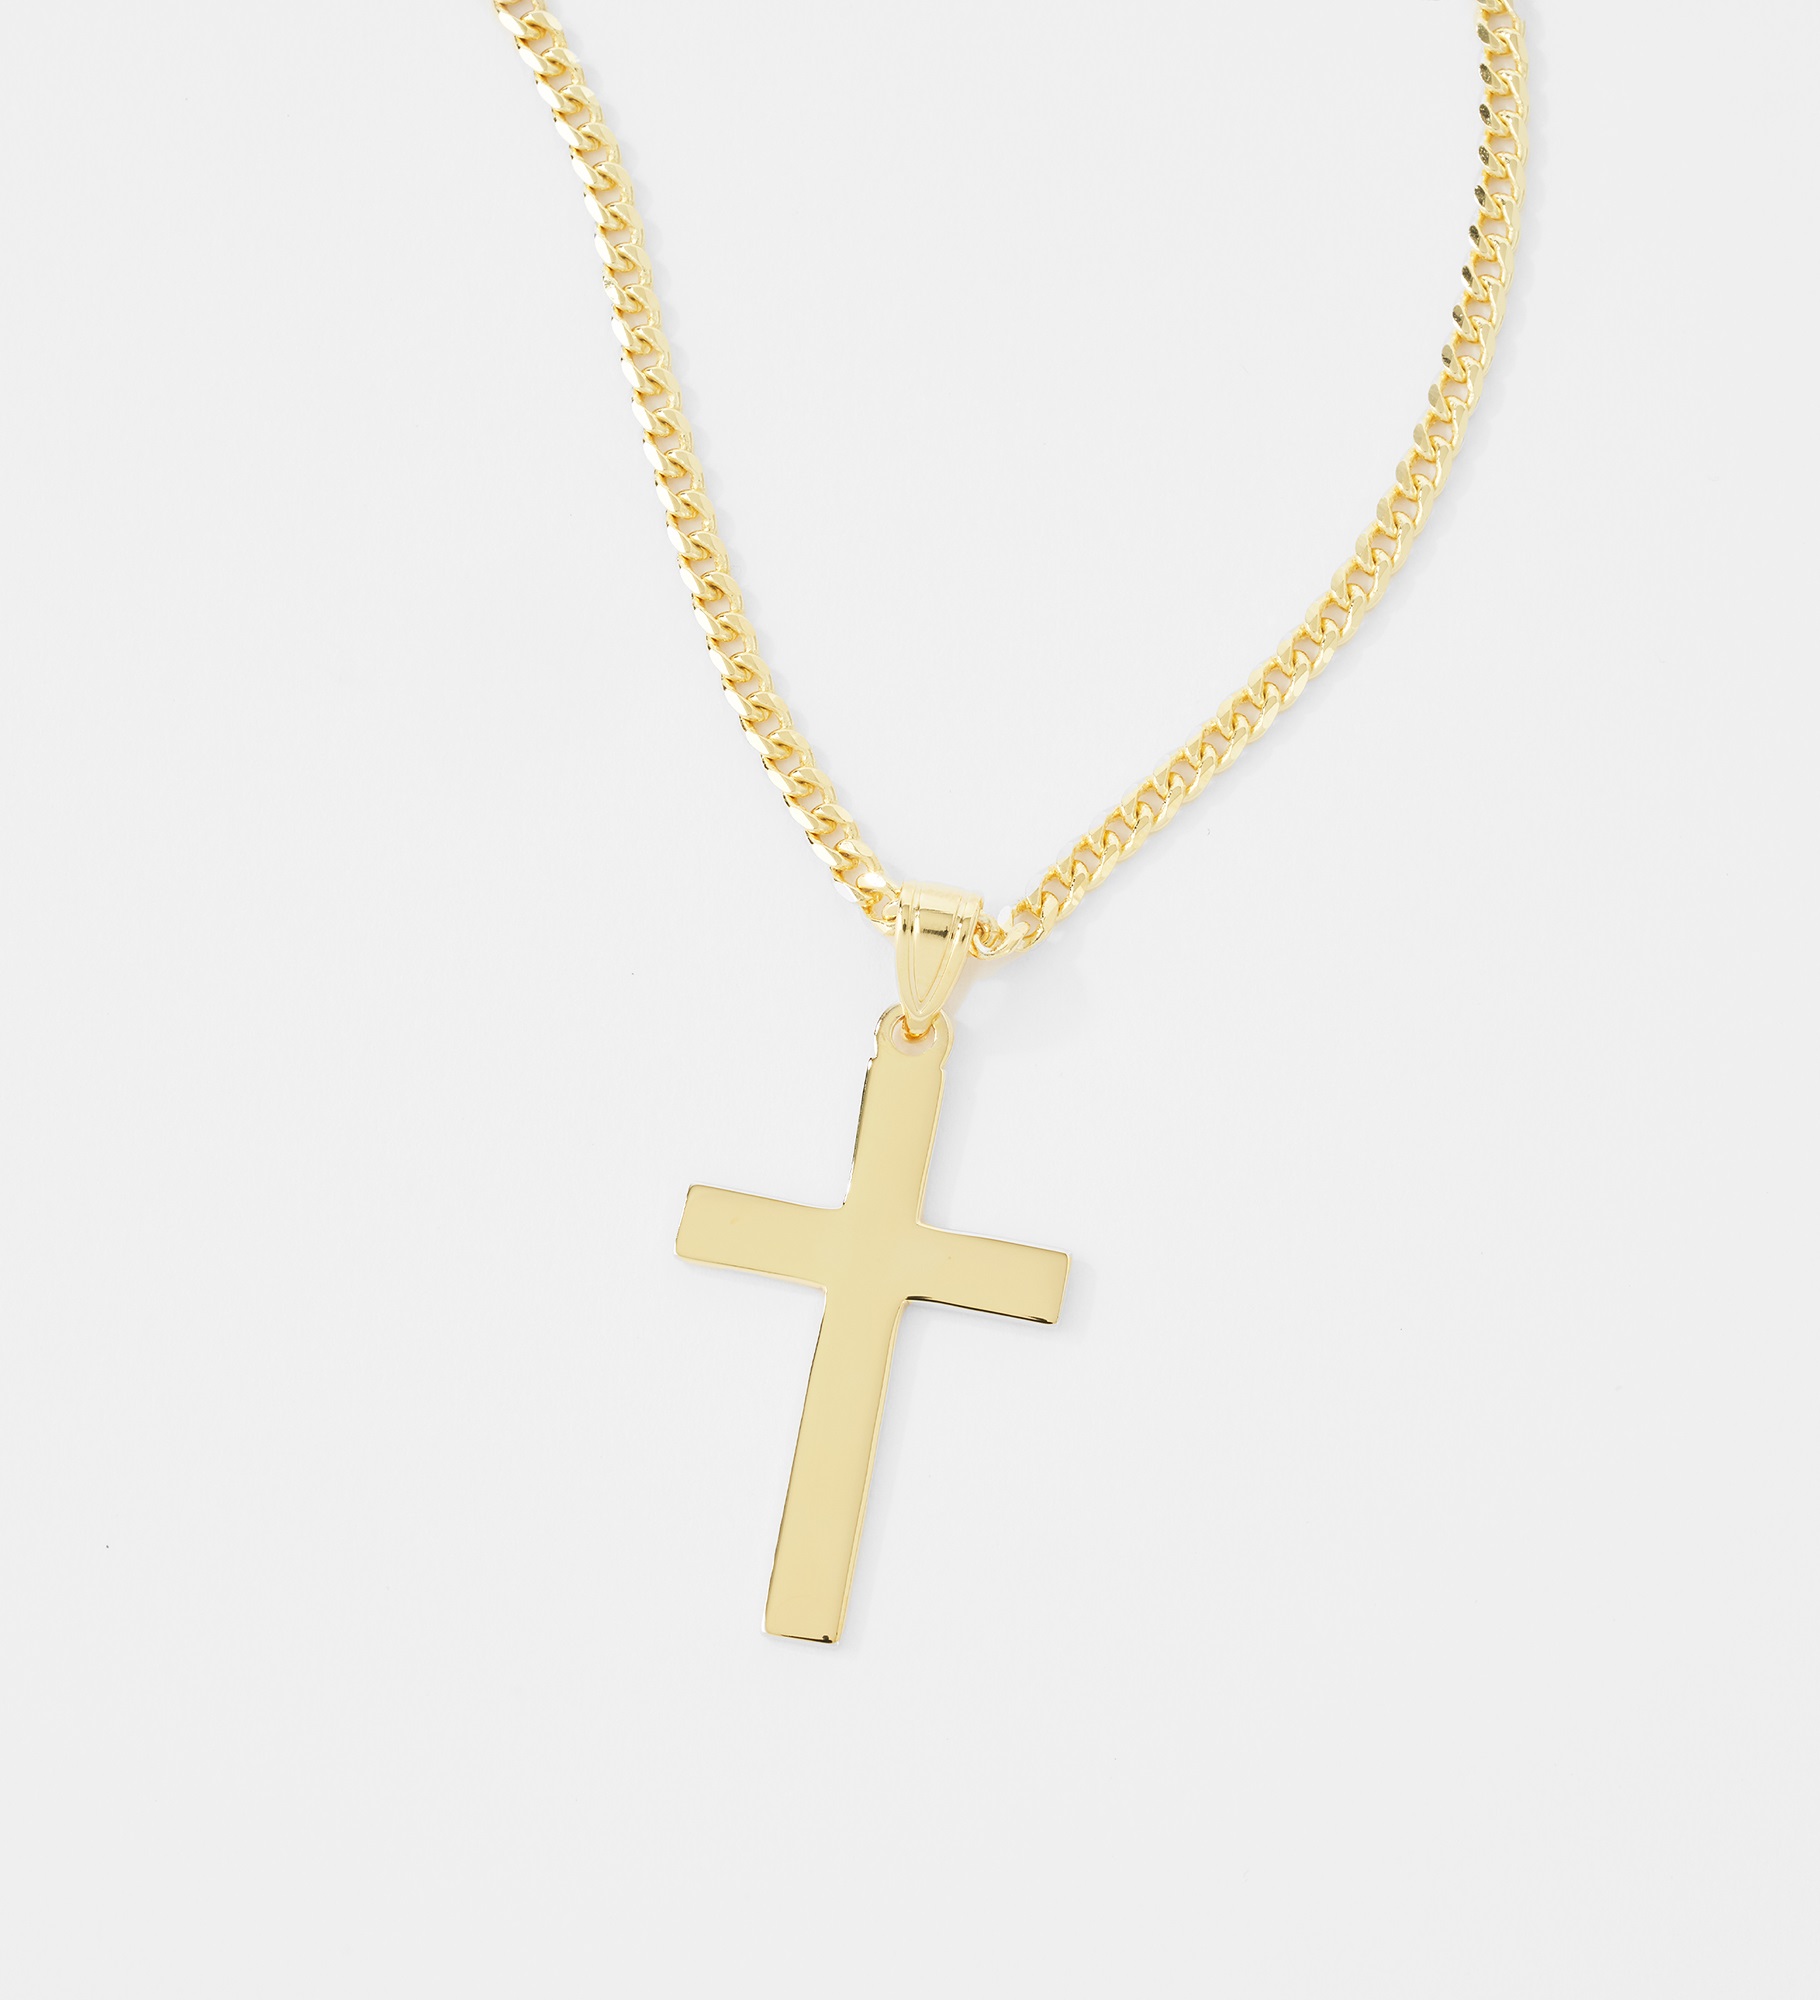 Engraved Gold Over Sterling Silver Cross Necklace